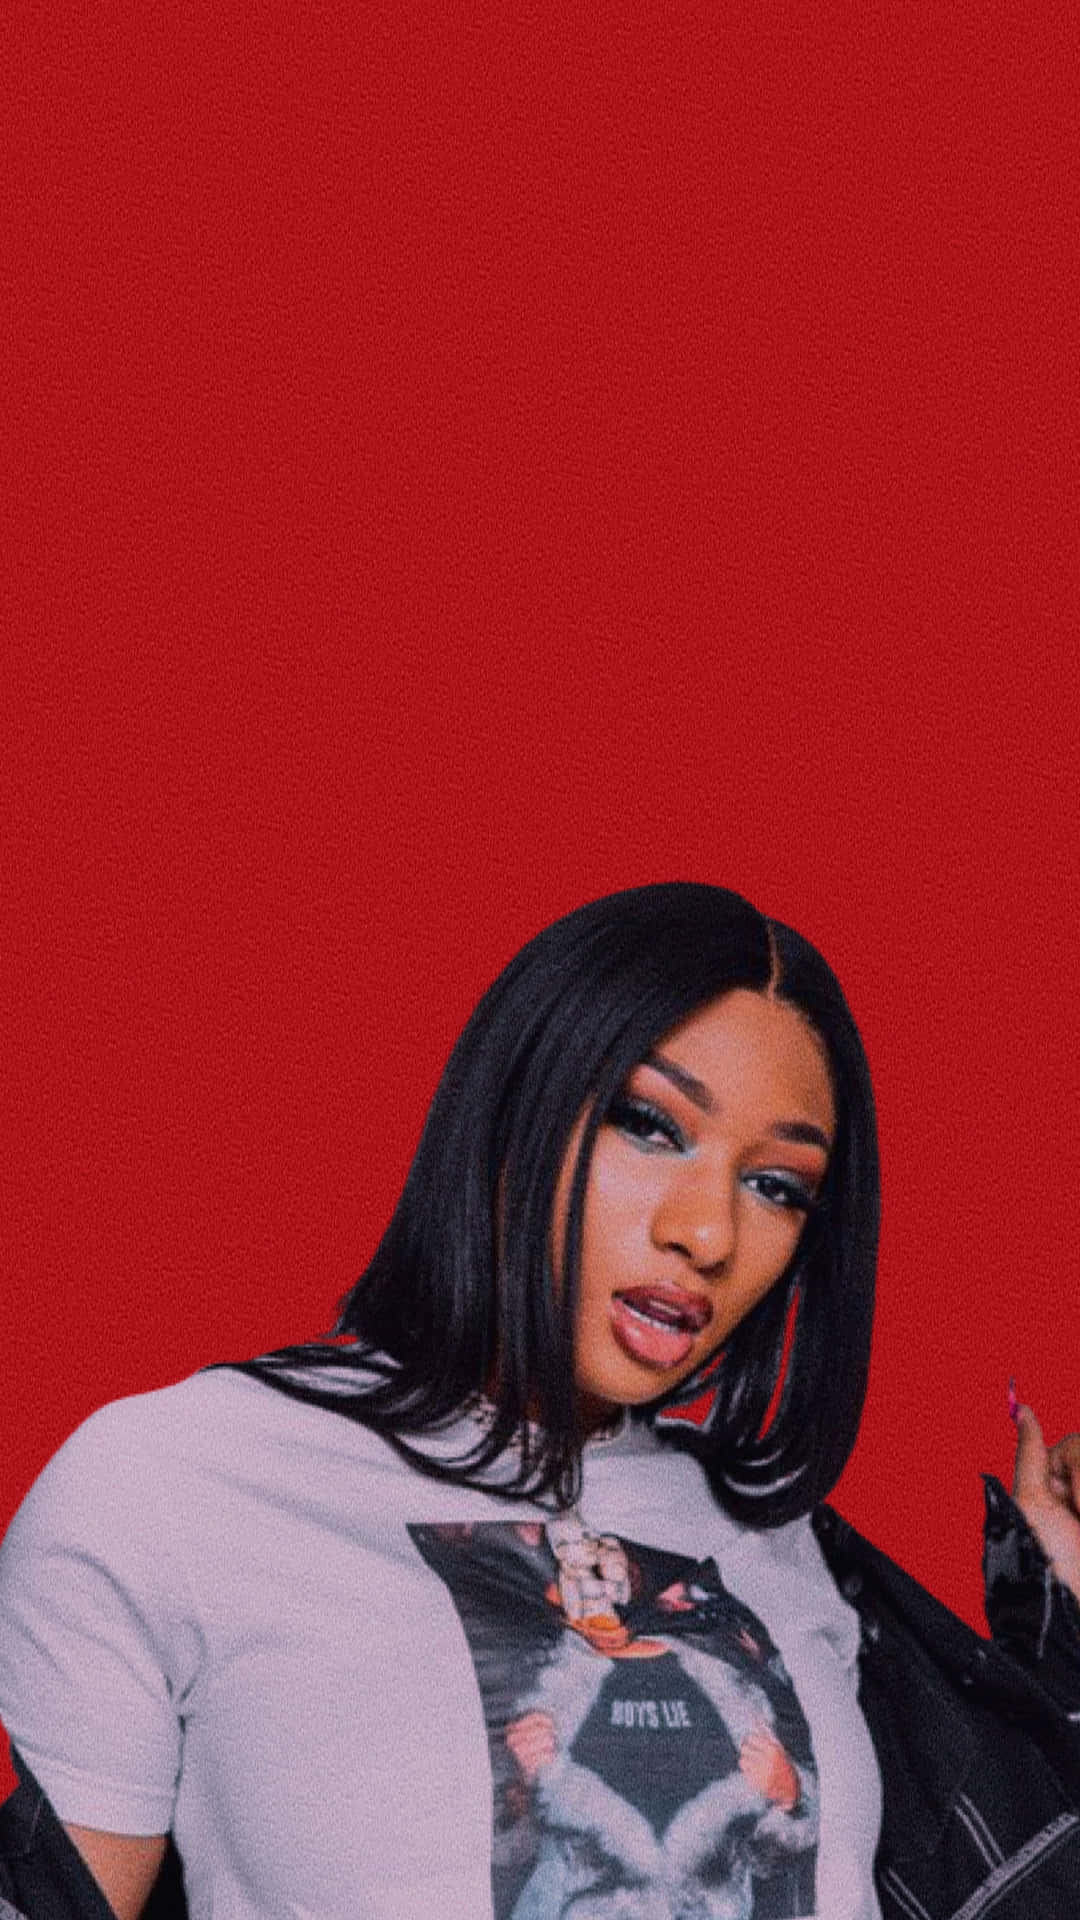 Megan Thee Stallion radiating confidence in an elegant outfit.